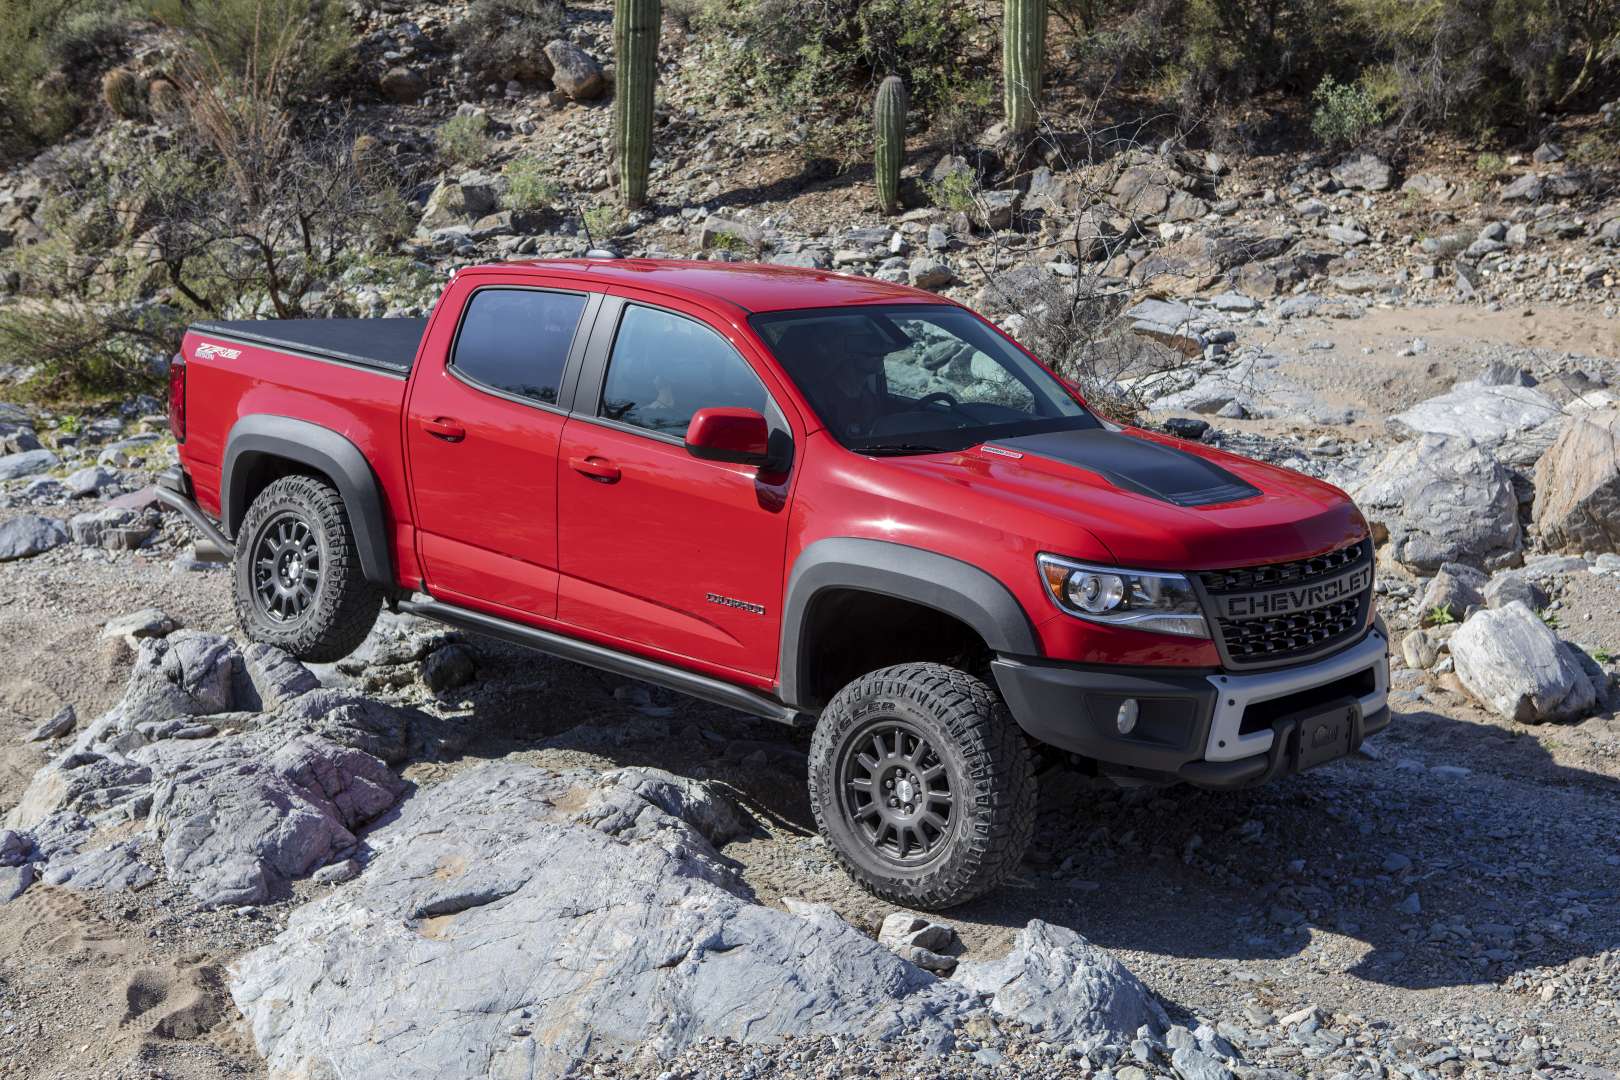 2021 Chevrolet Colorado ZR2 Bison is Overland Truck of the Year